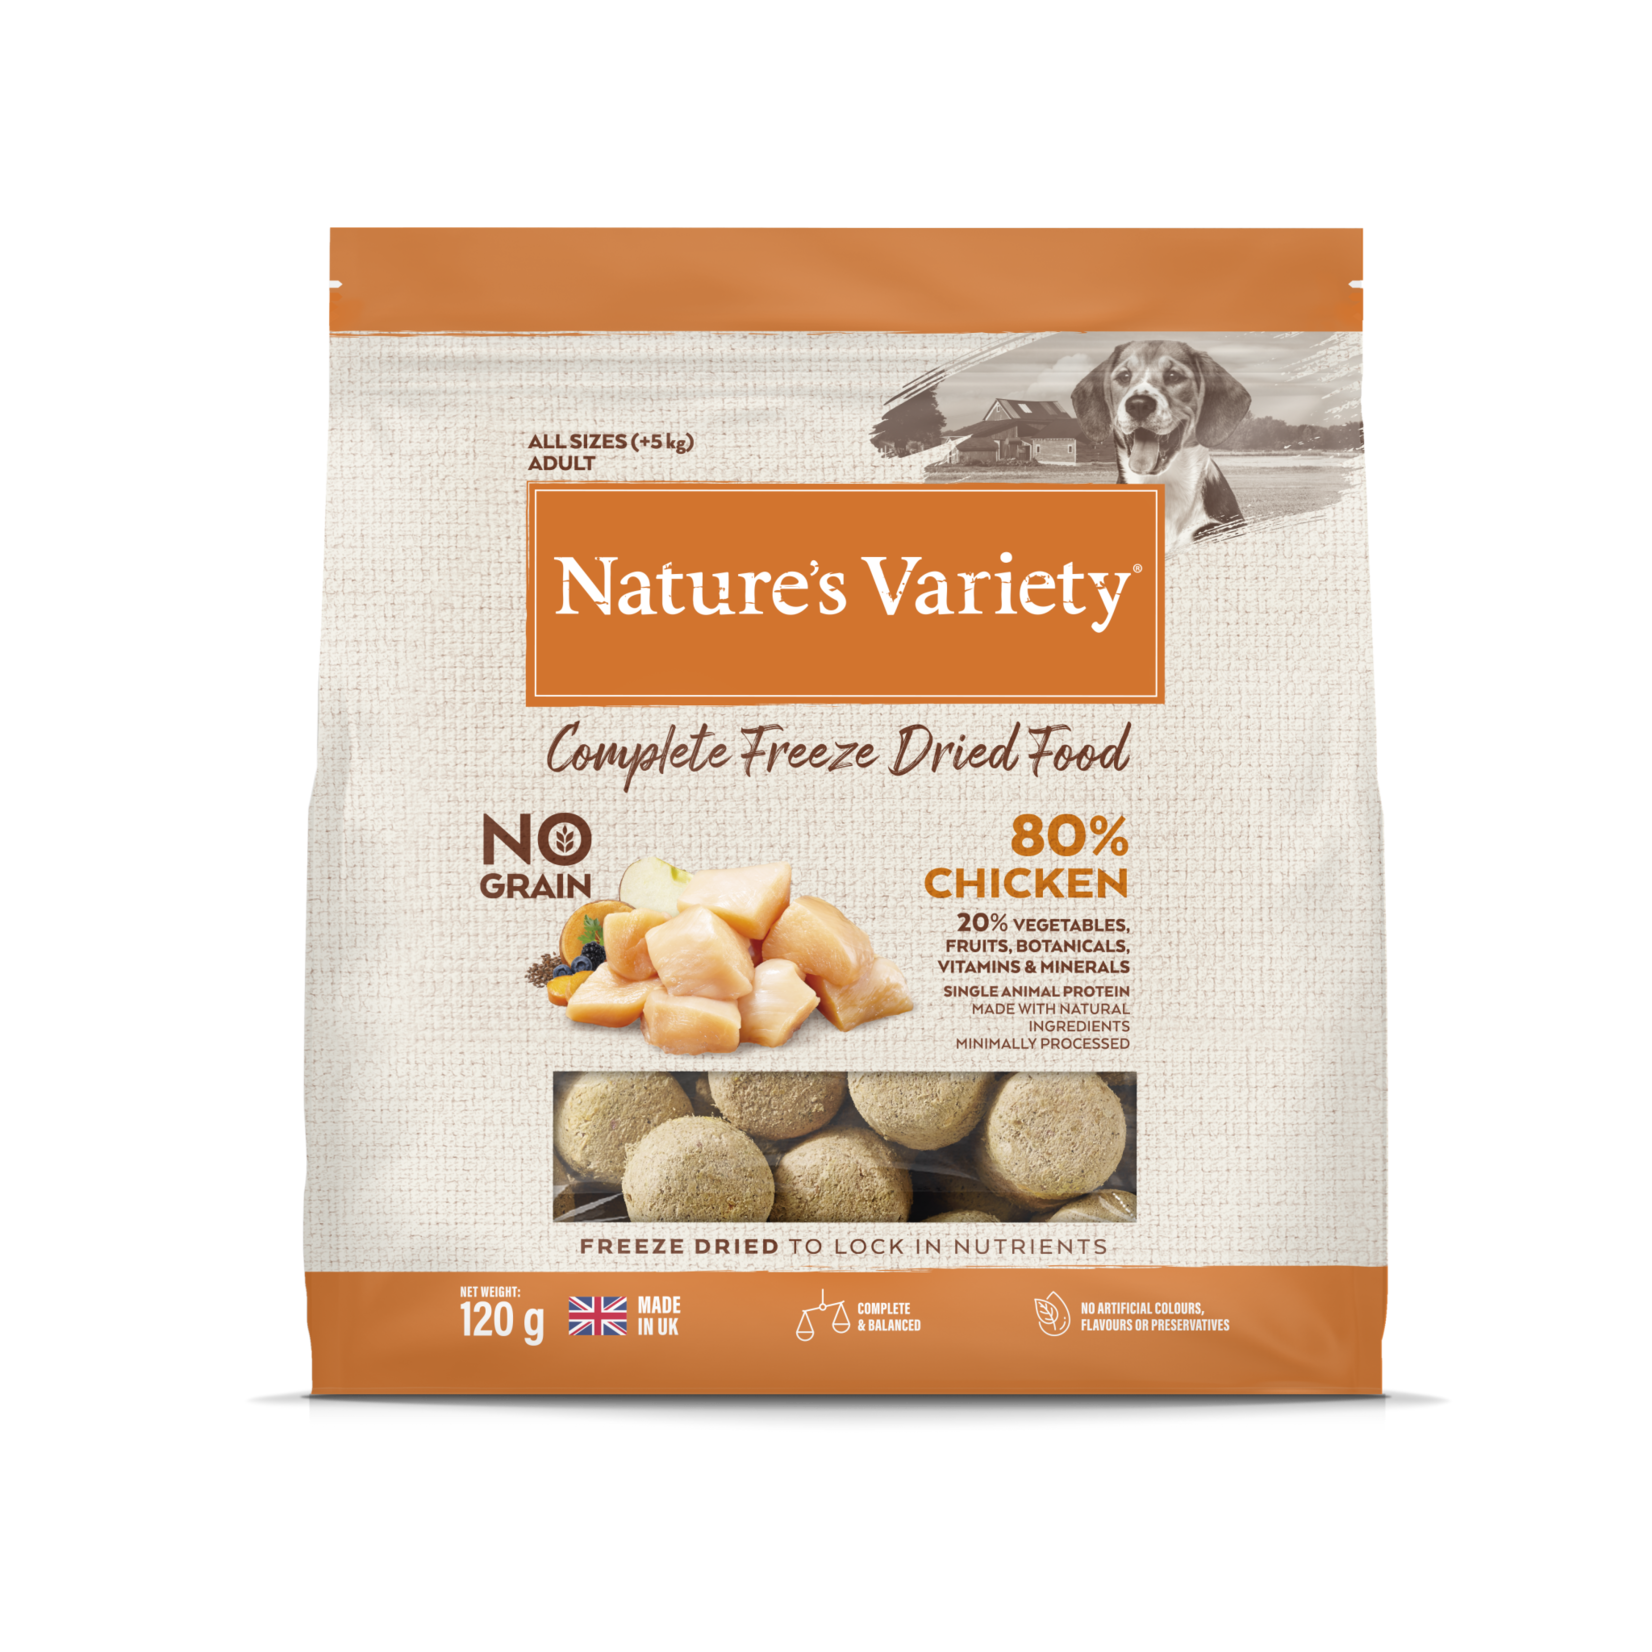 natures menu Nature's Variety Dog Grain Free Complete Freeze-Dried Food Chicken